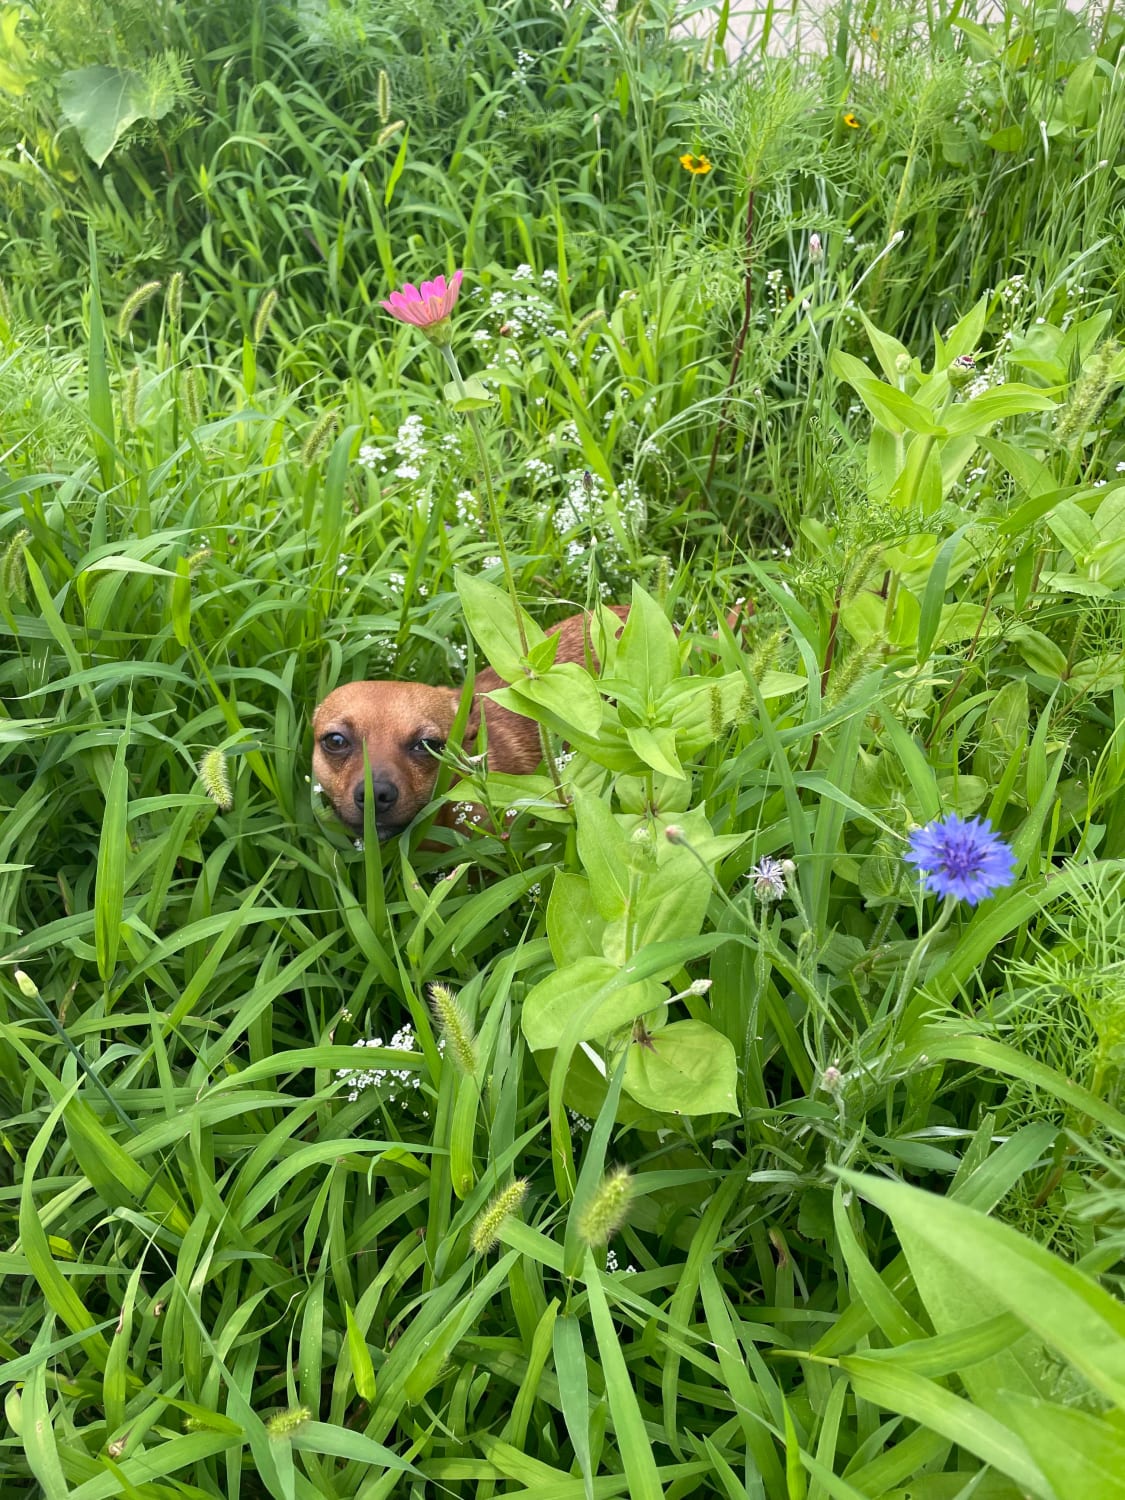 Just a girl and her familiar, refusing to take down their wildflowers (city ordinance)